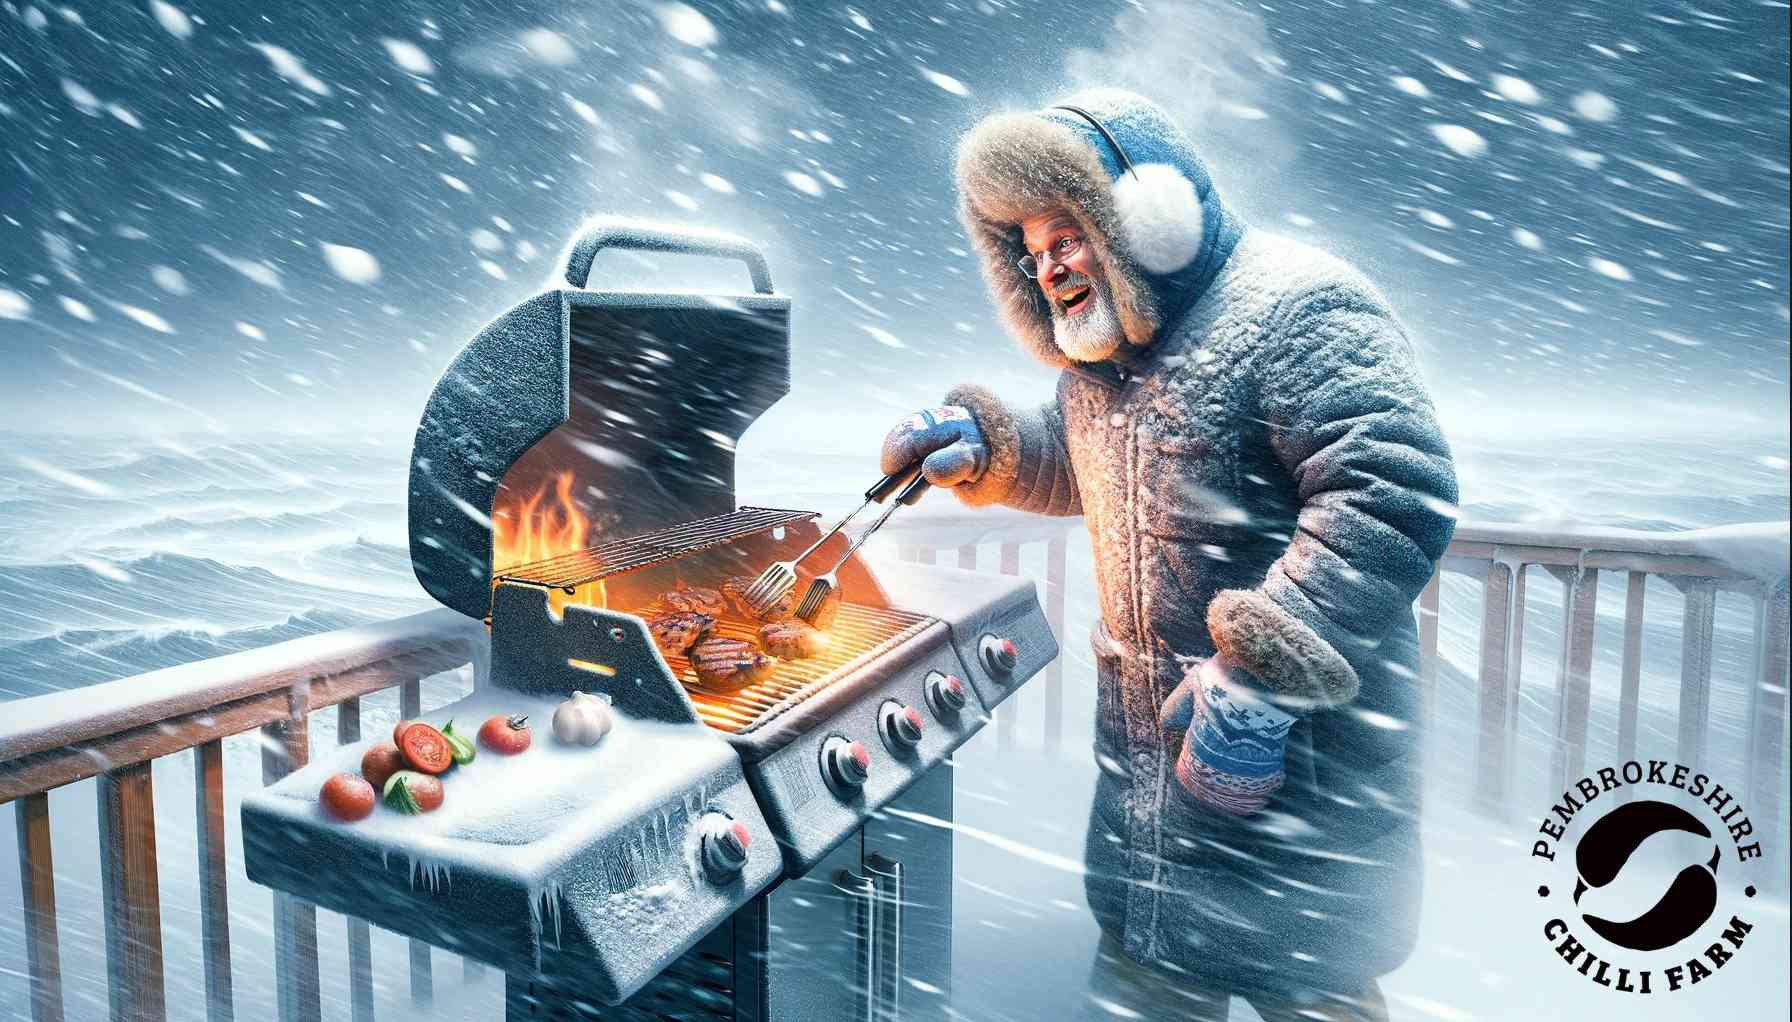 Enter our extreme BBQ competition and wins some saucy prizes